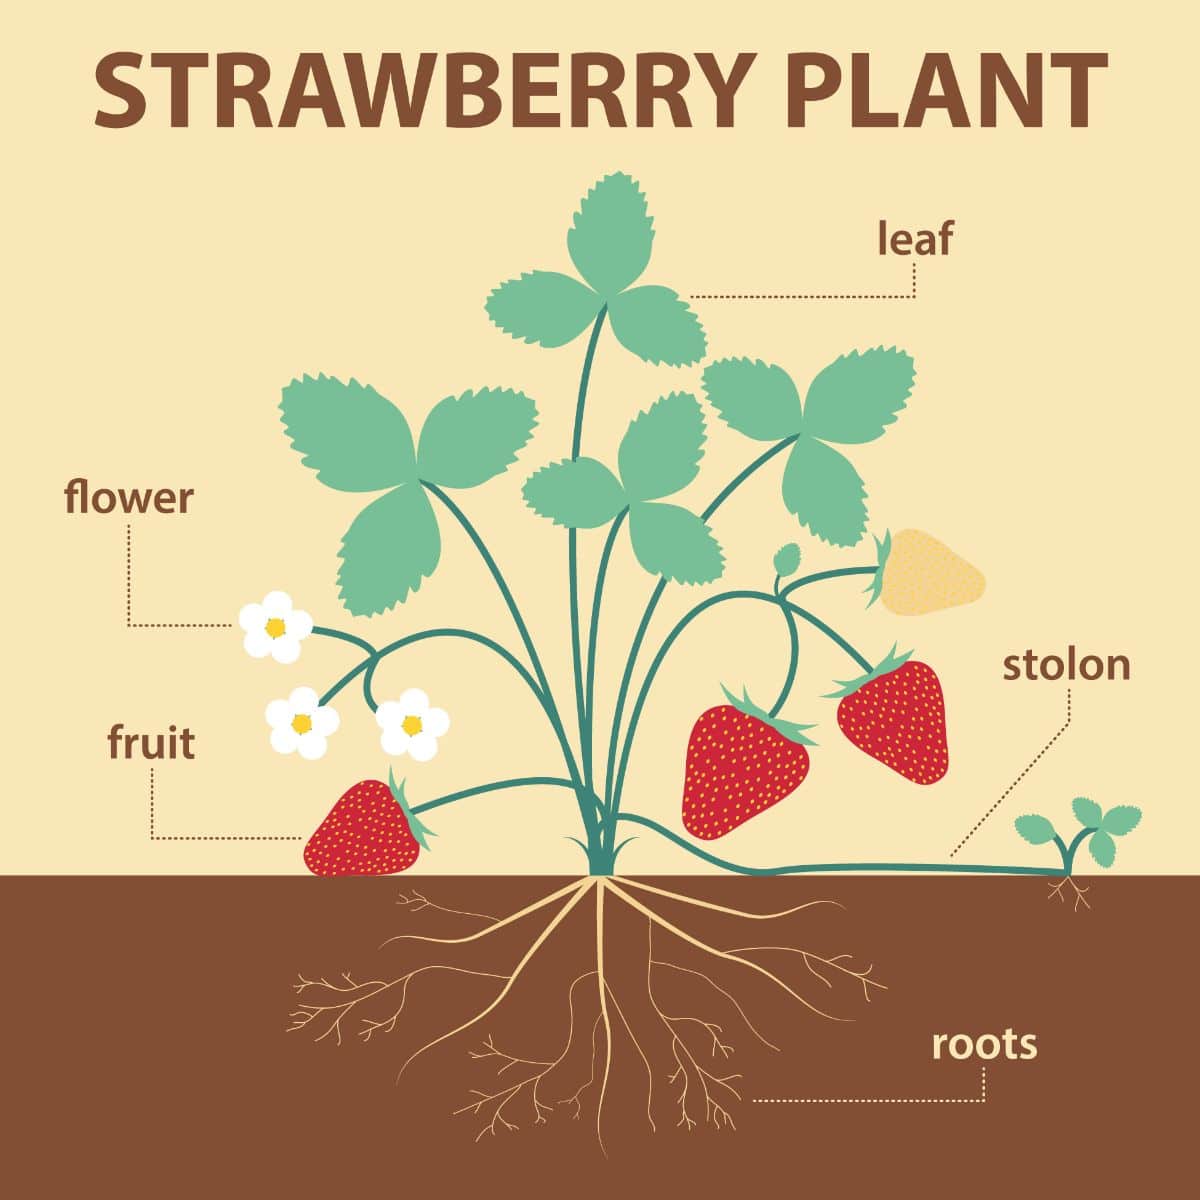 Strawberry plant poster